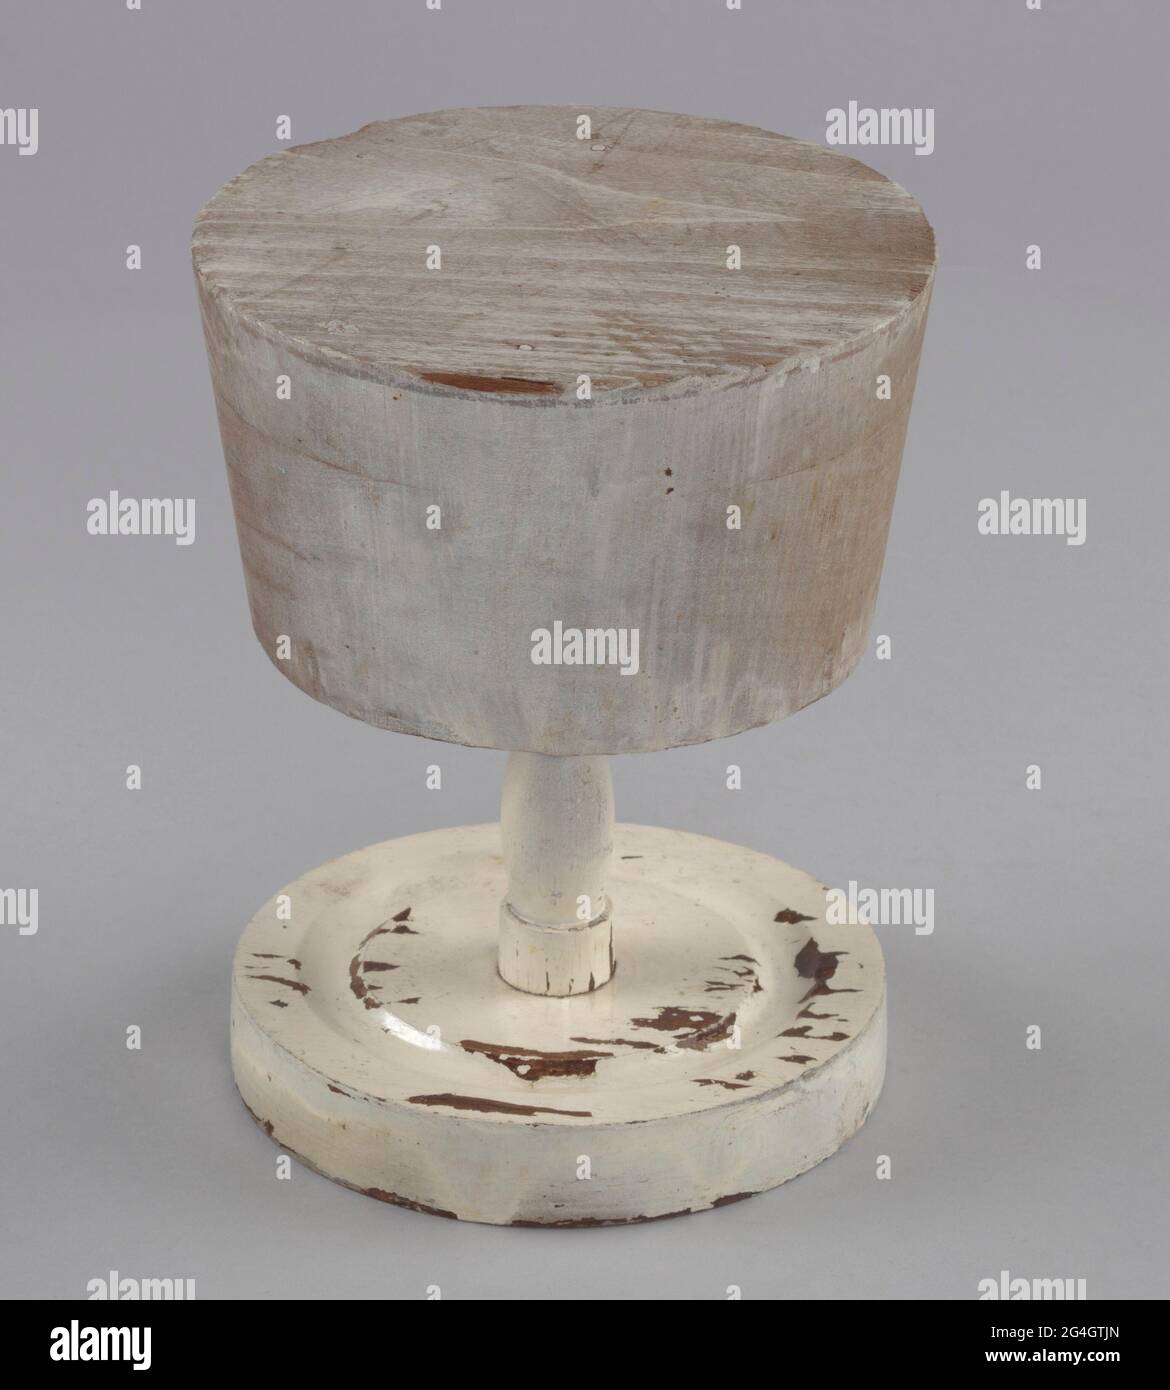 A wooden hat stand base (a) and form (b) painted white. The base is circular with one groove carved into the top of the base. A turned wooden dowel is screwed into the center of the base. The form is circular and tapers in toward the bottom where it attaches to the stand via a hole in the center of the underside. Mae Reeves (1912-2016) was a pioneering African-American milliner who was famous for her custom-made hats. Her business, Mae's Millinery Shop in downtown Philadelphia, was one of the first shops in the city to be owned by a woman of African American heritage. Stock Photo